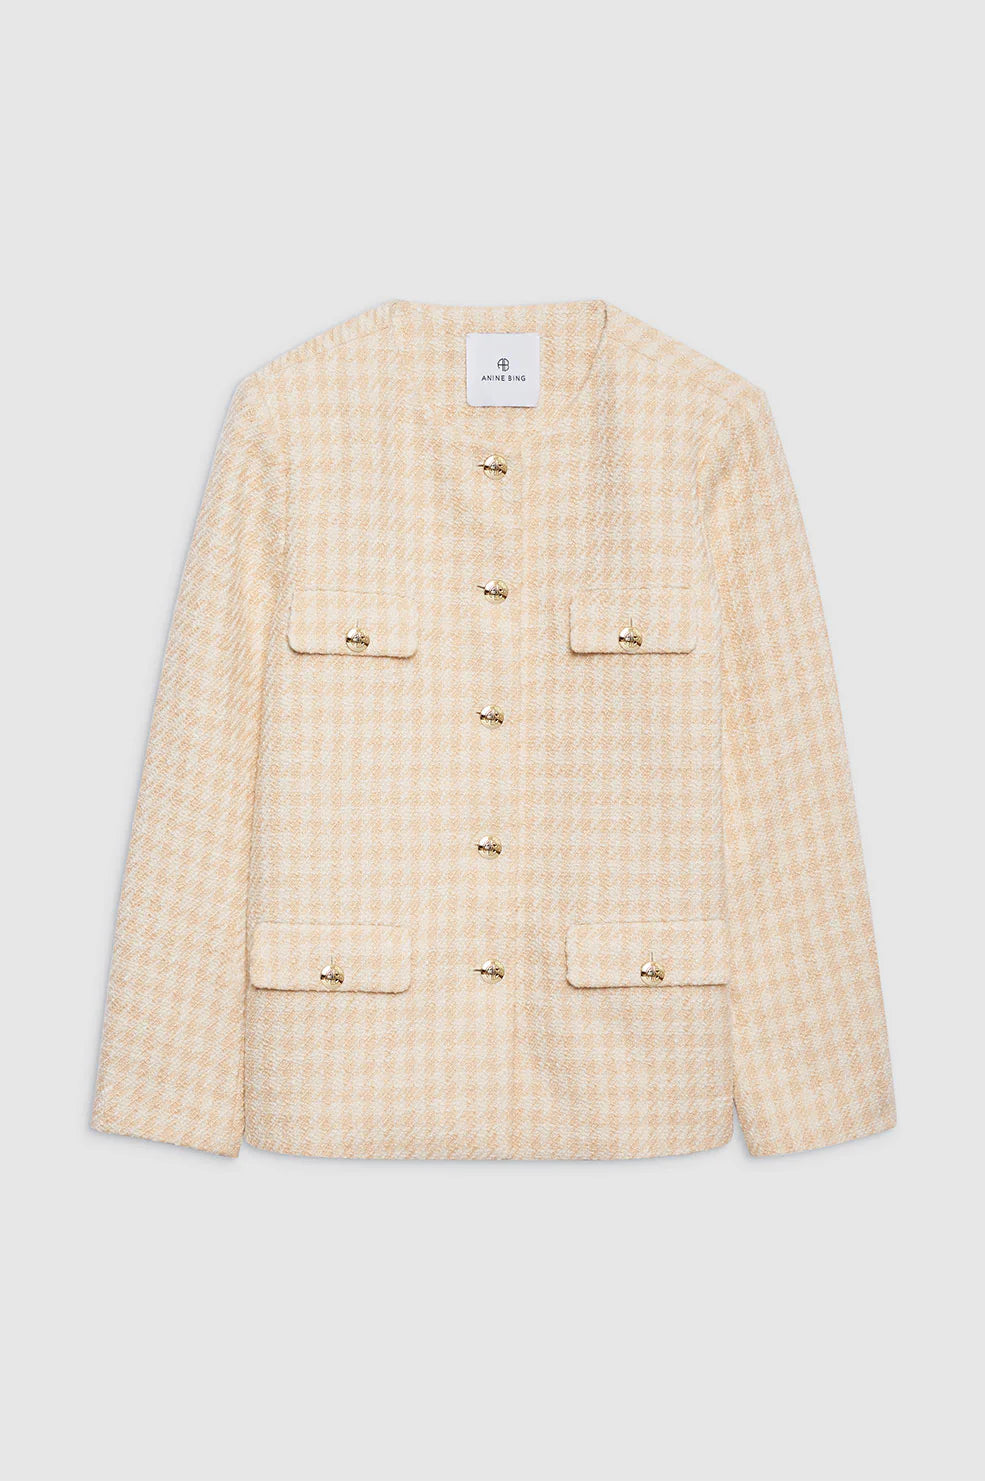 Anine Bing Janet Jacket - Cream And Peach Houndstooth